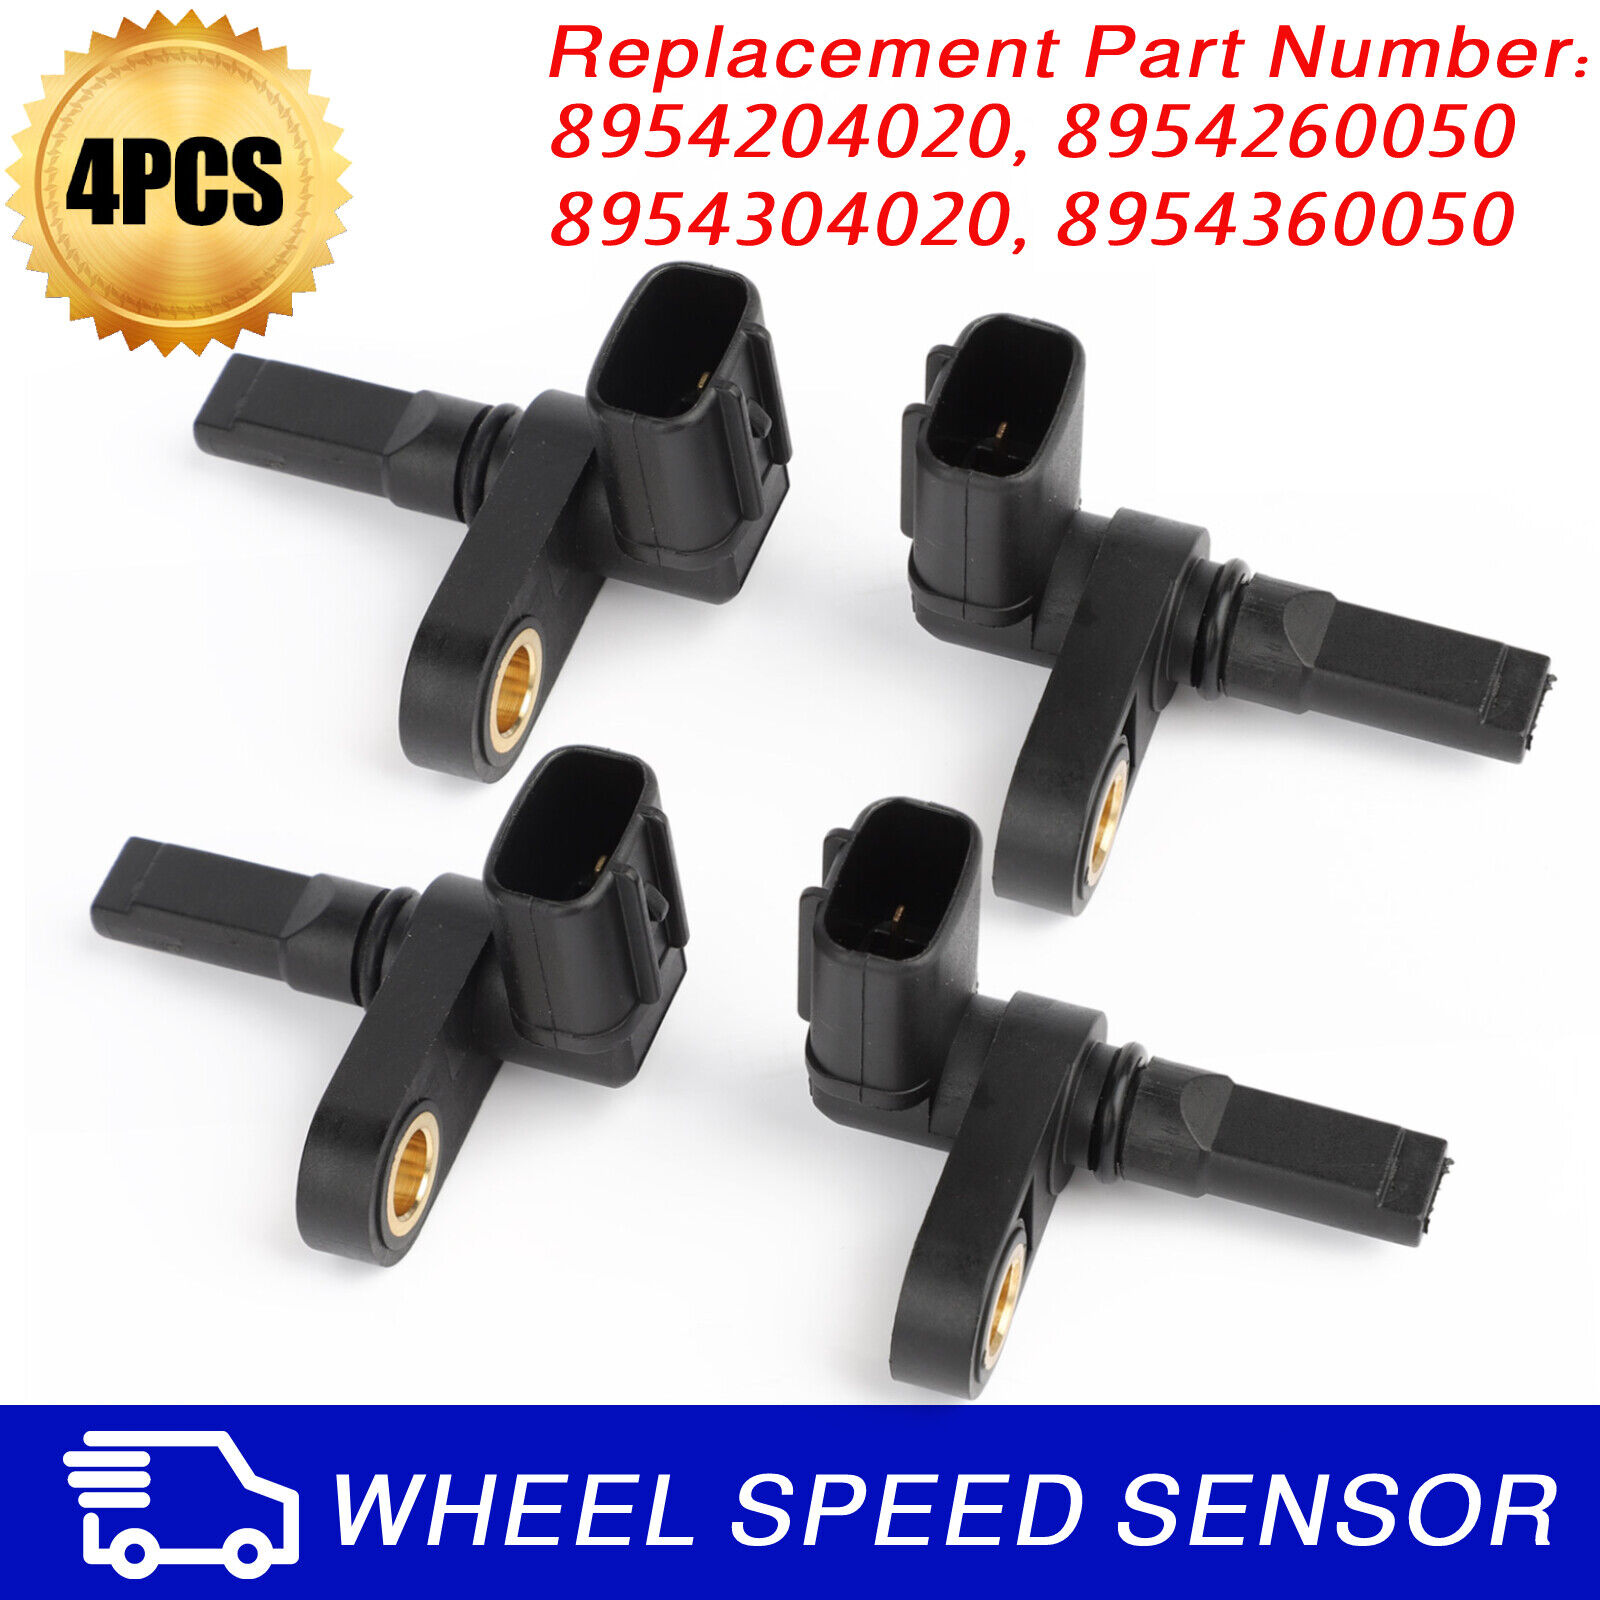 4X ABS Wheel Speed Sensor Front & Rear - Right & Left For Toyota 4Runner Tacoma